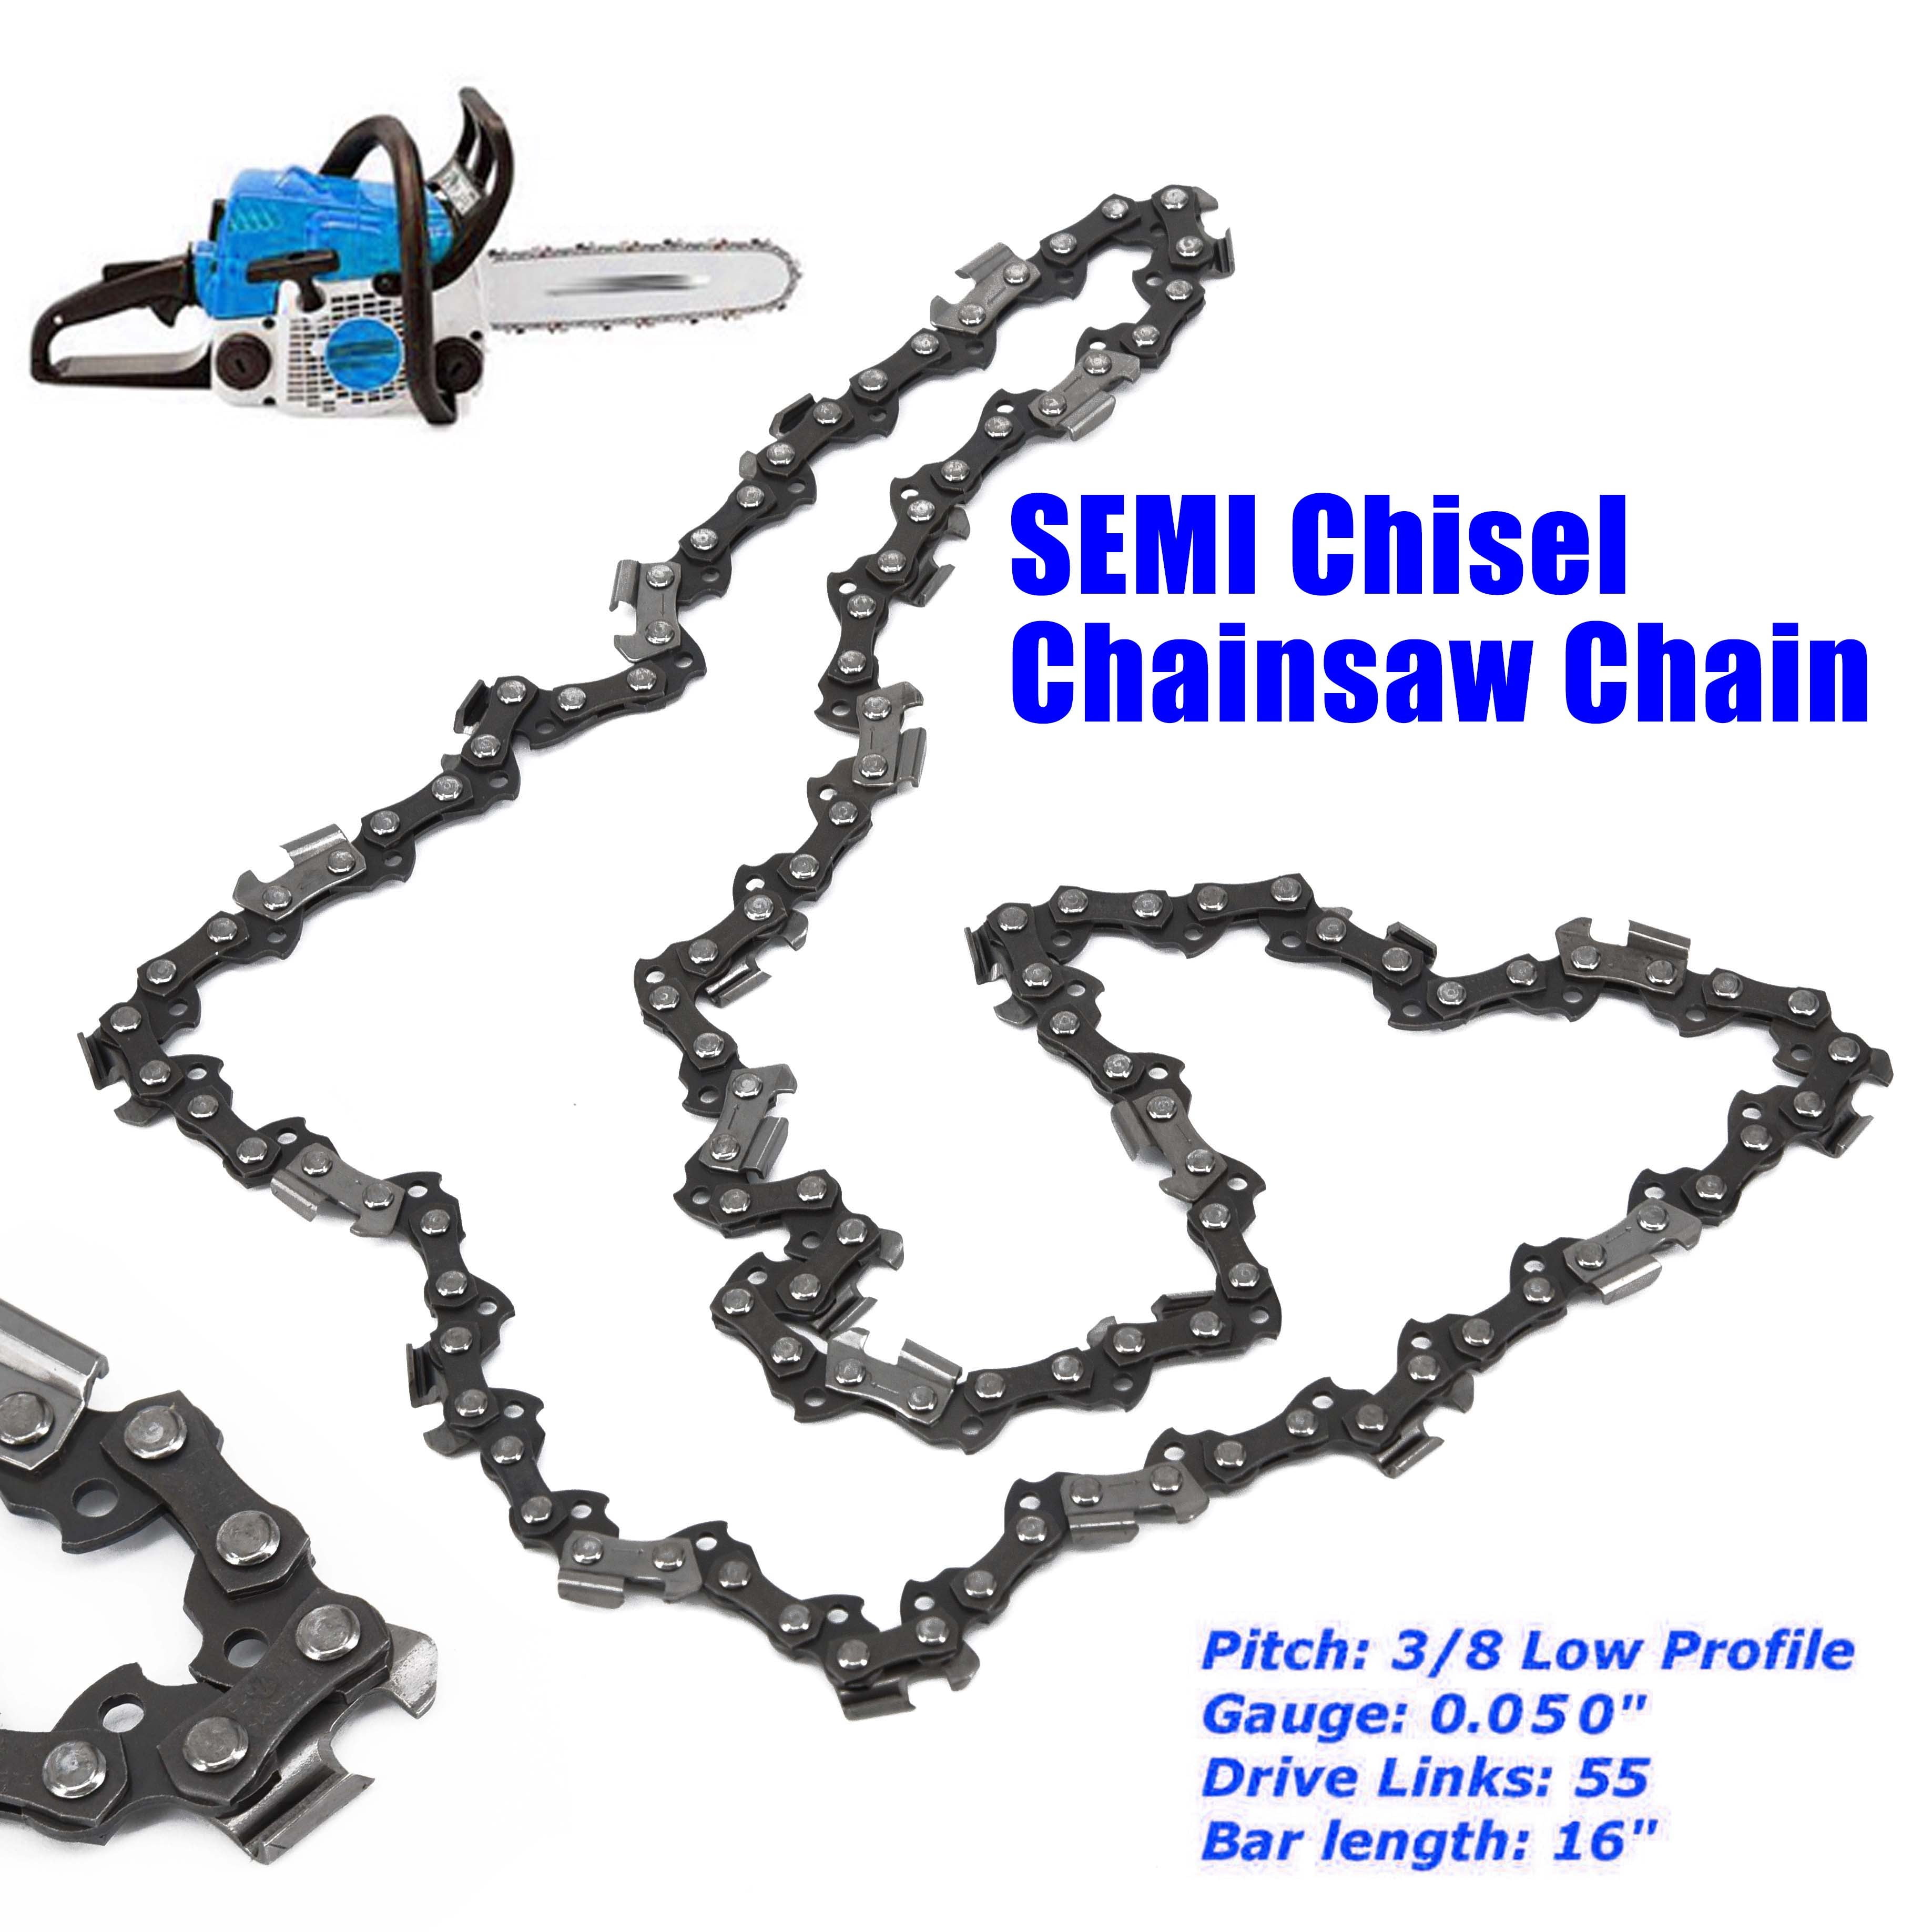 STIHL 3/8 Pitch Ps3 Picco Chain for 18 Inch Bar 66 Drivers Full Chisel 050 Gauge for sale online 